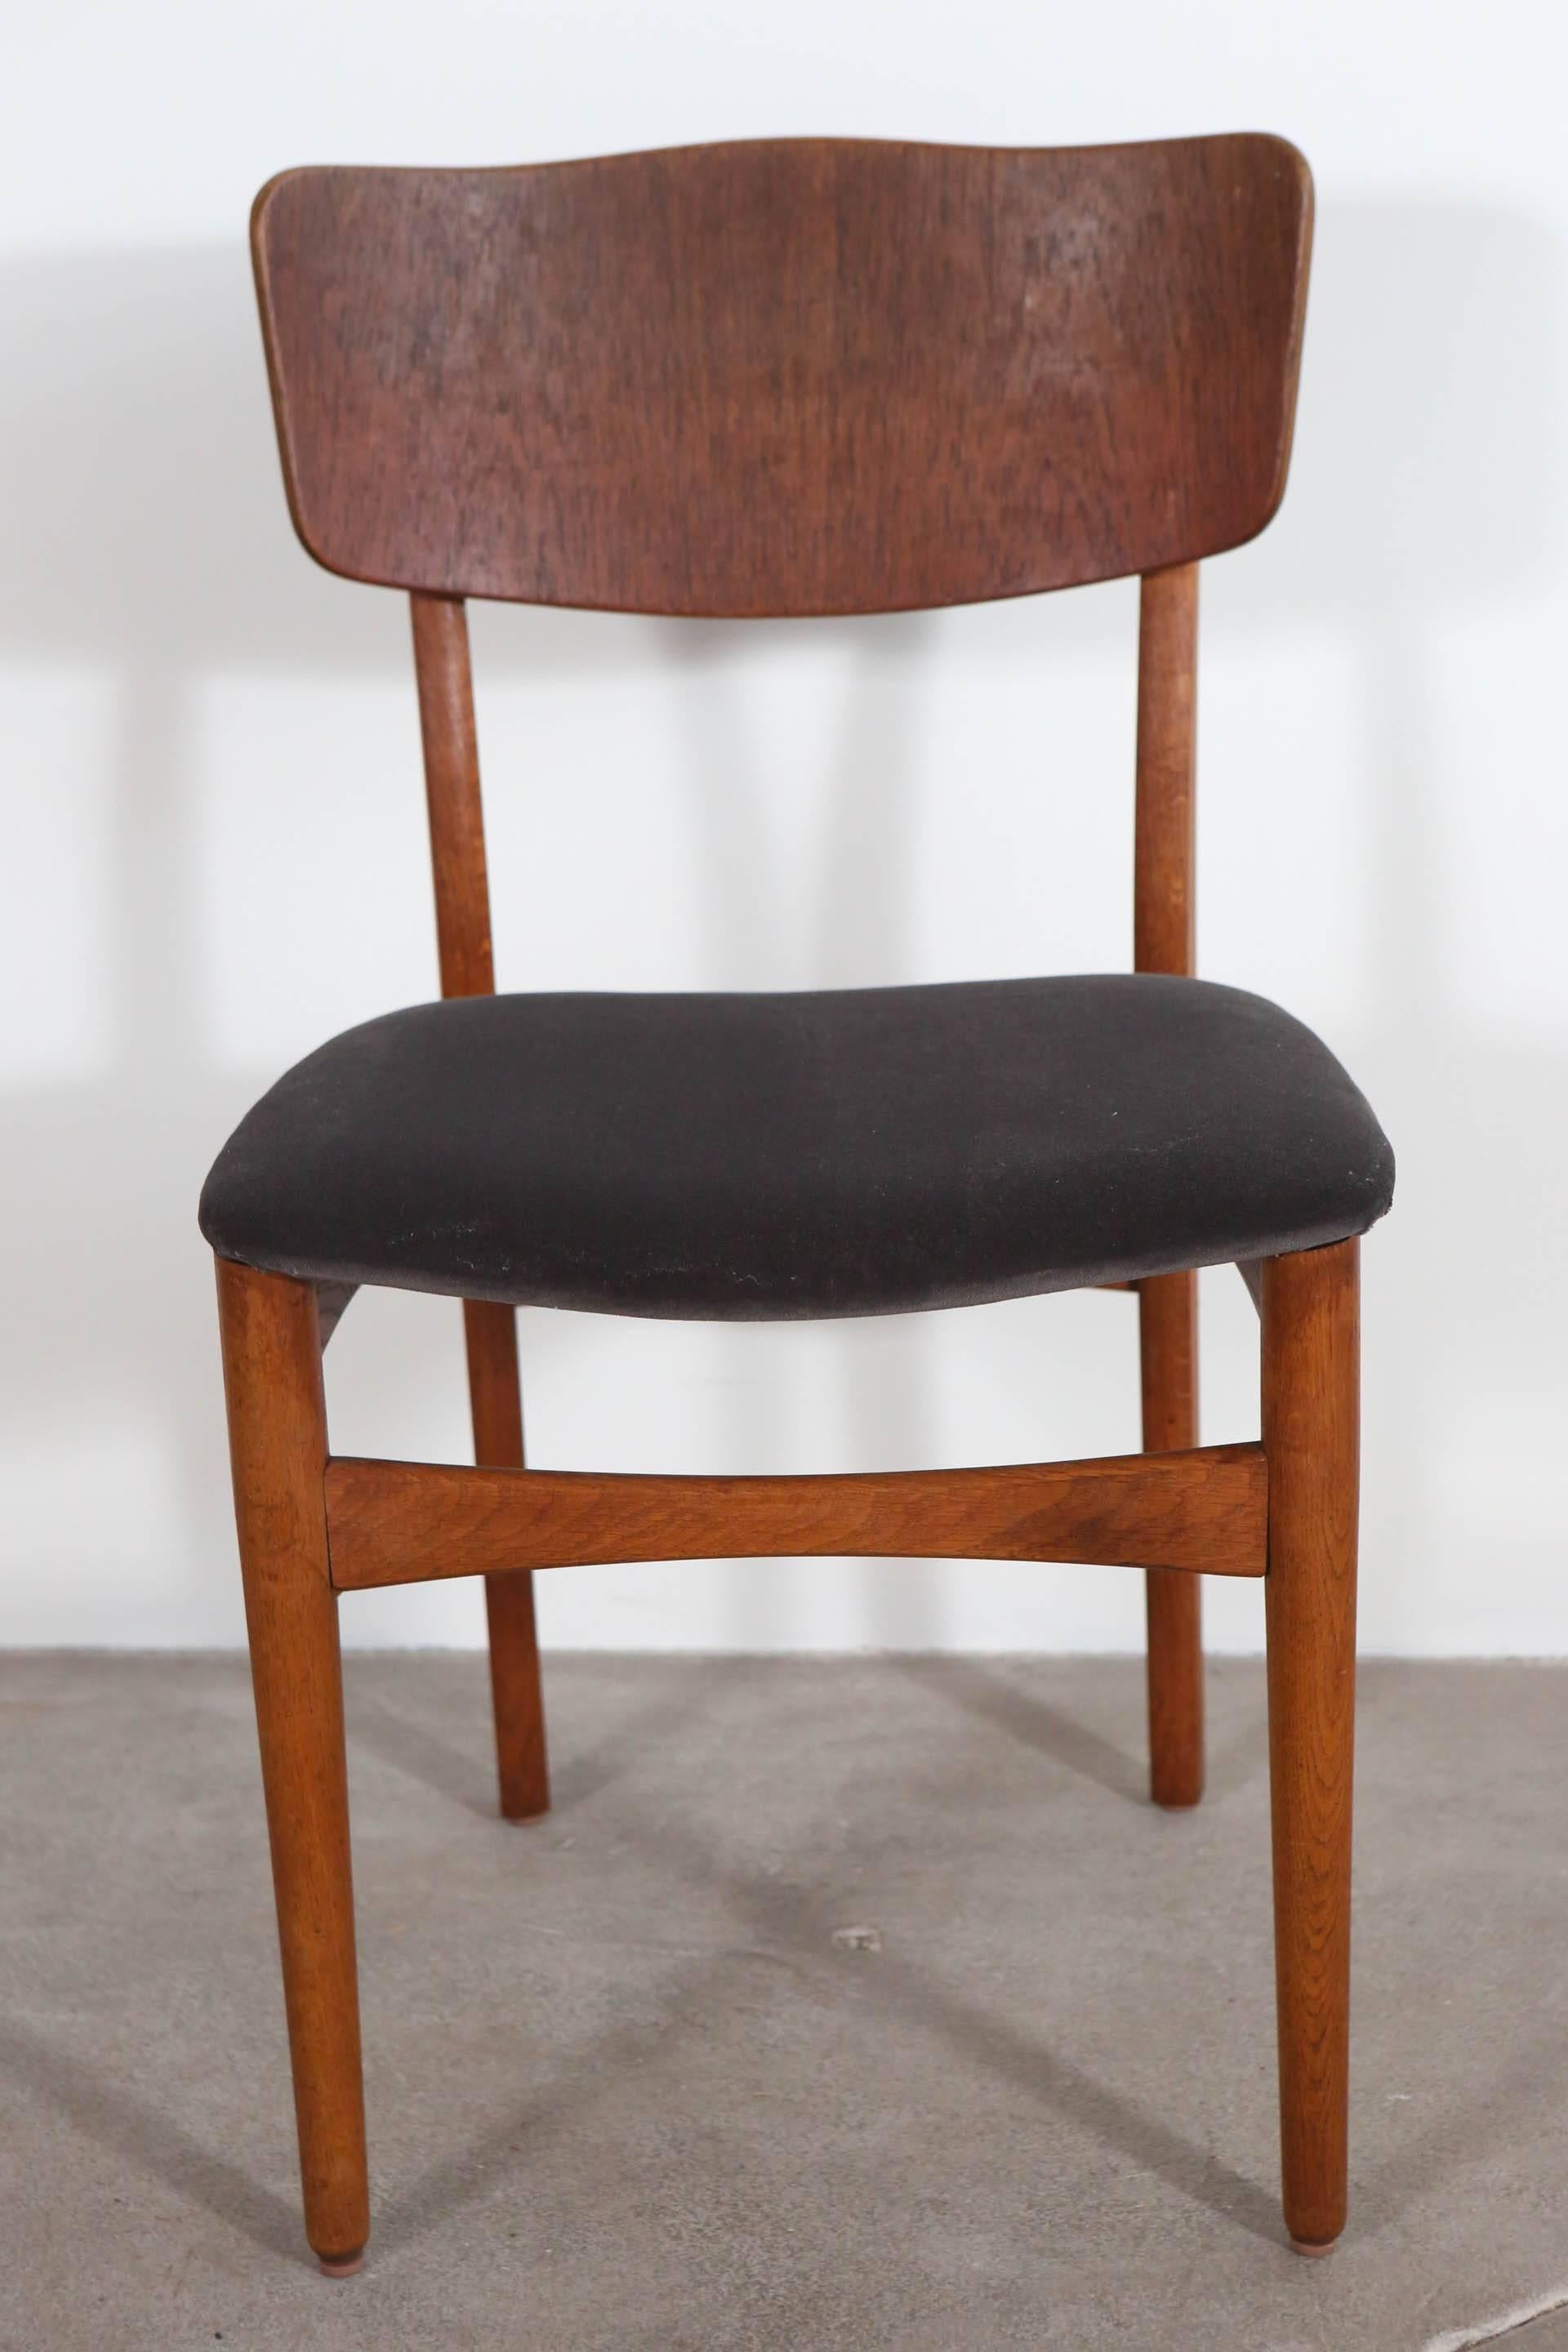 Teak framed Mid-Century dining chair with newly upholstered grey seat cushions.